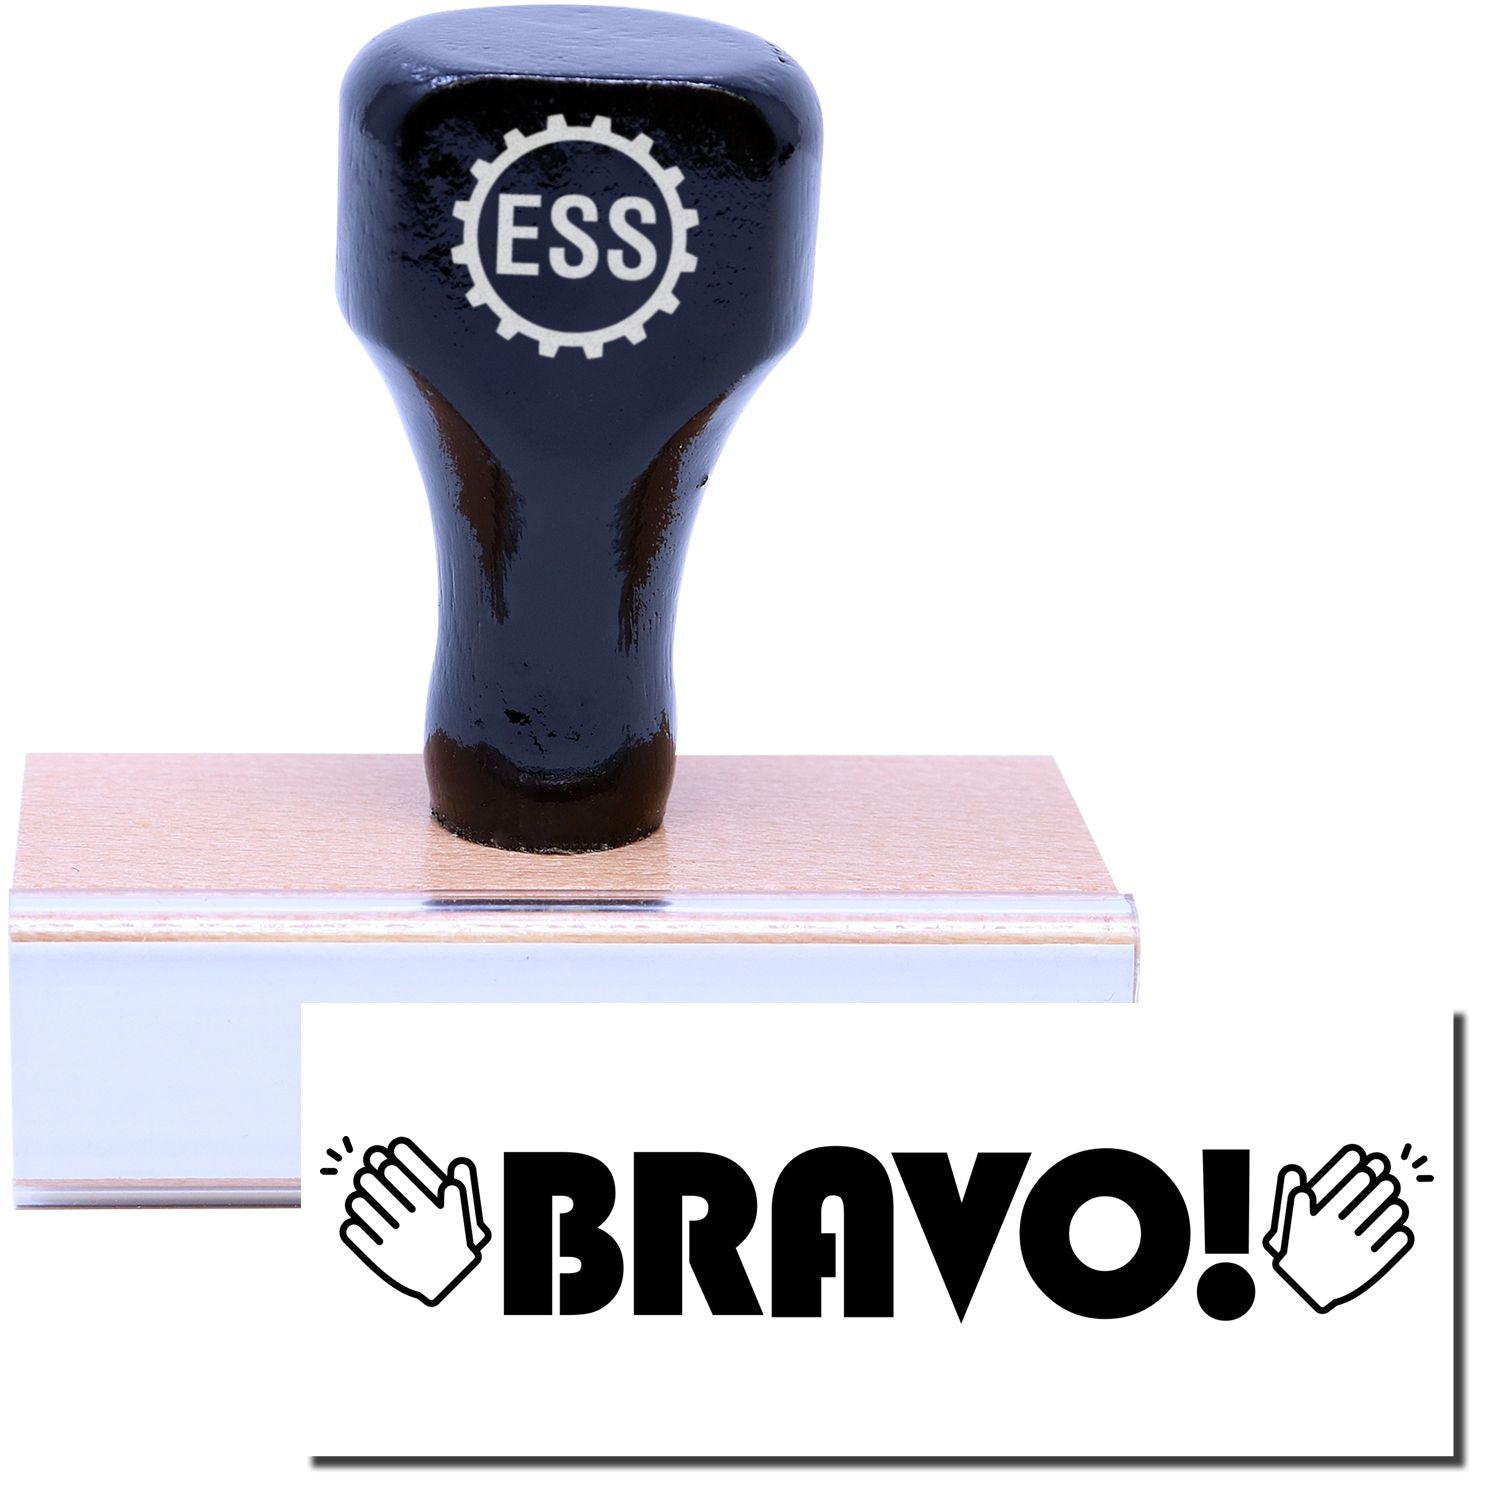 A stock office rubber stamp with a stamped image showing how the text "BRAVO!" with images of clapping hands on both left and right sides is displayed after stamping.